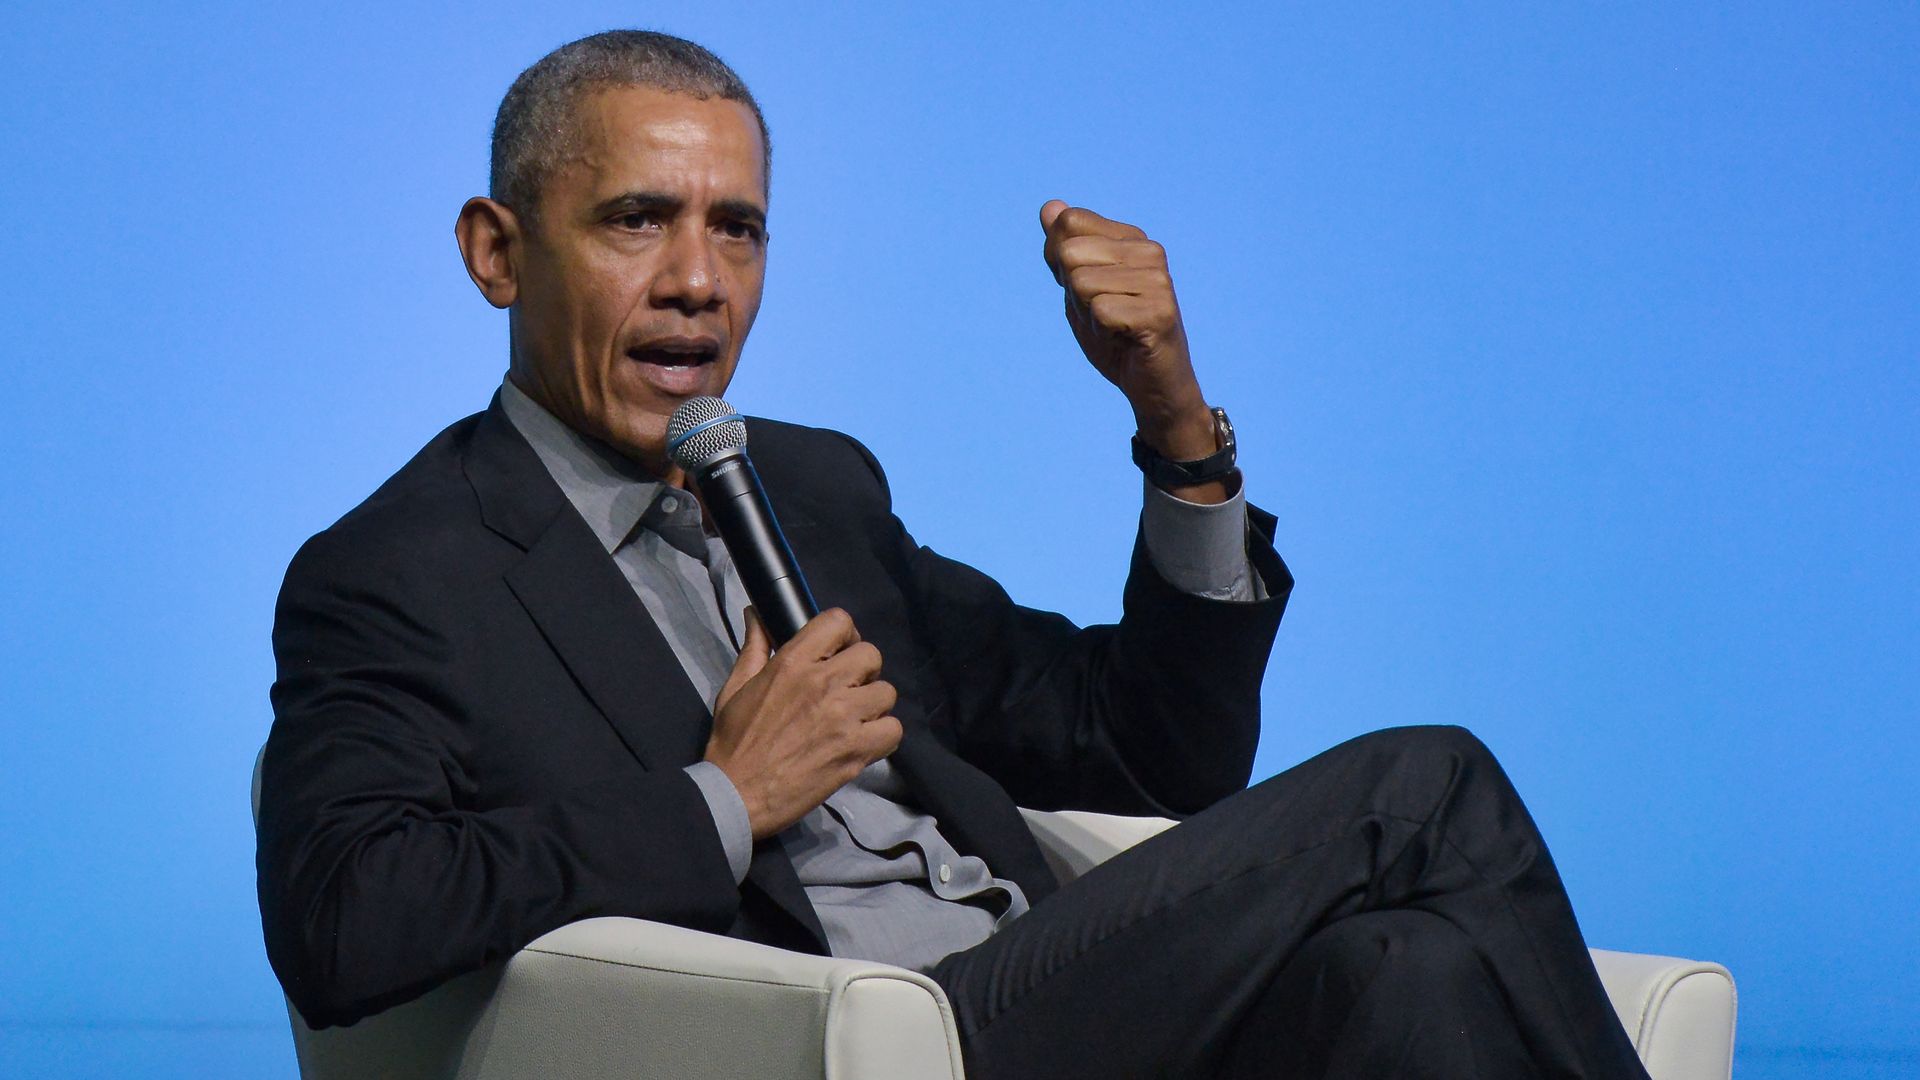 In this image, Obama sits while gesturing 